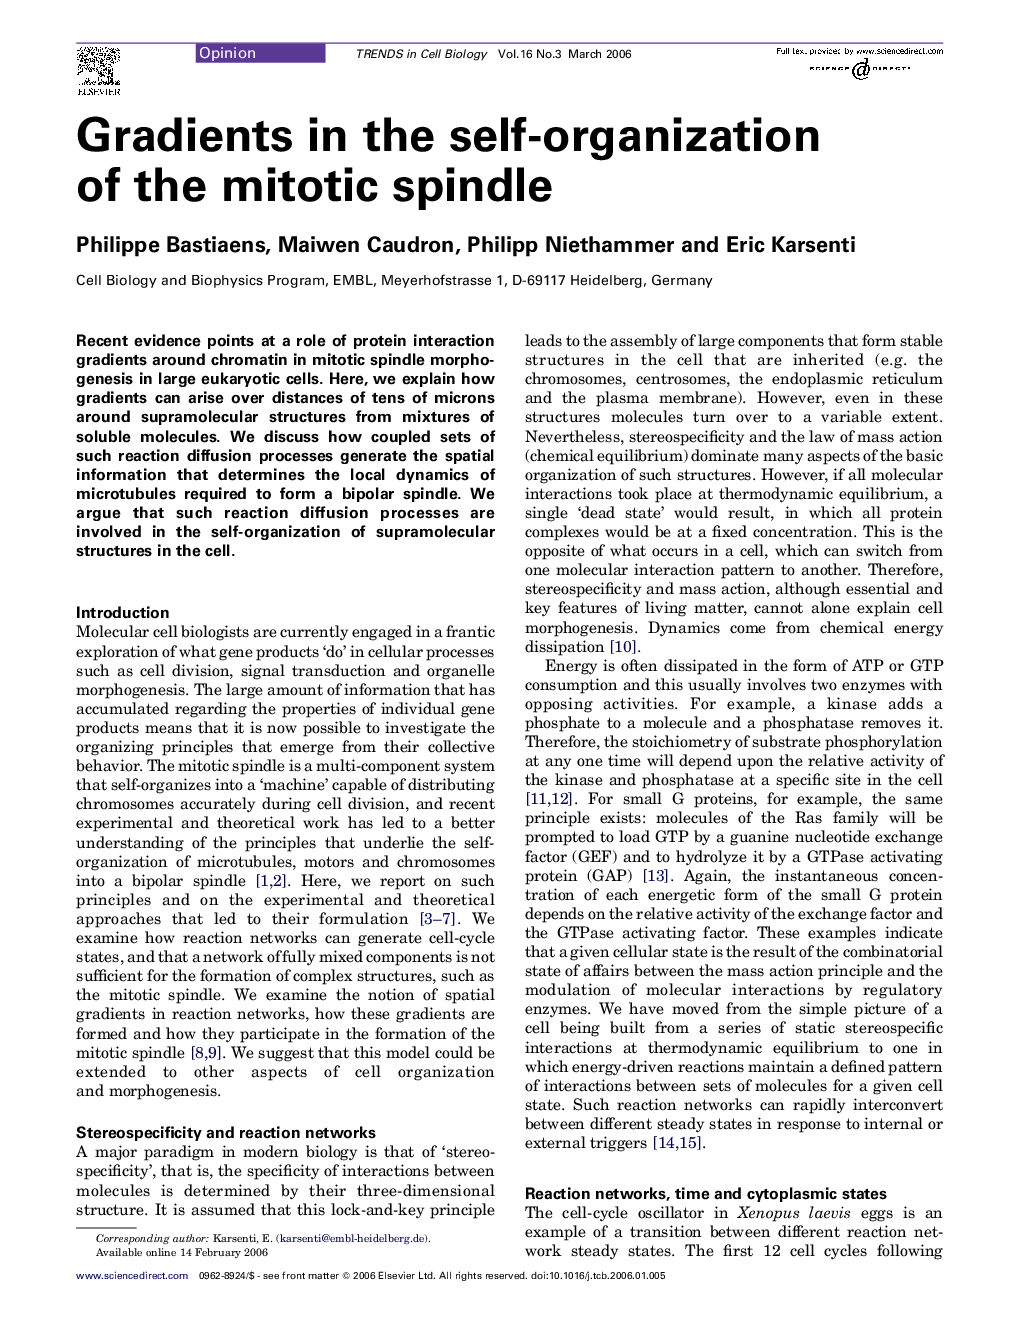 Gradients in the self-organization of the mitotic spindle